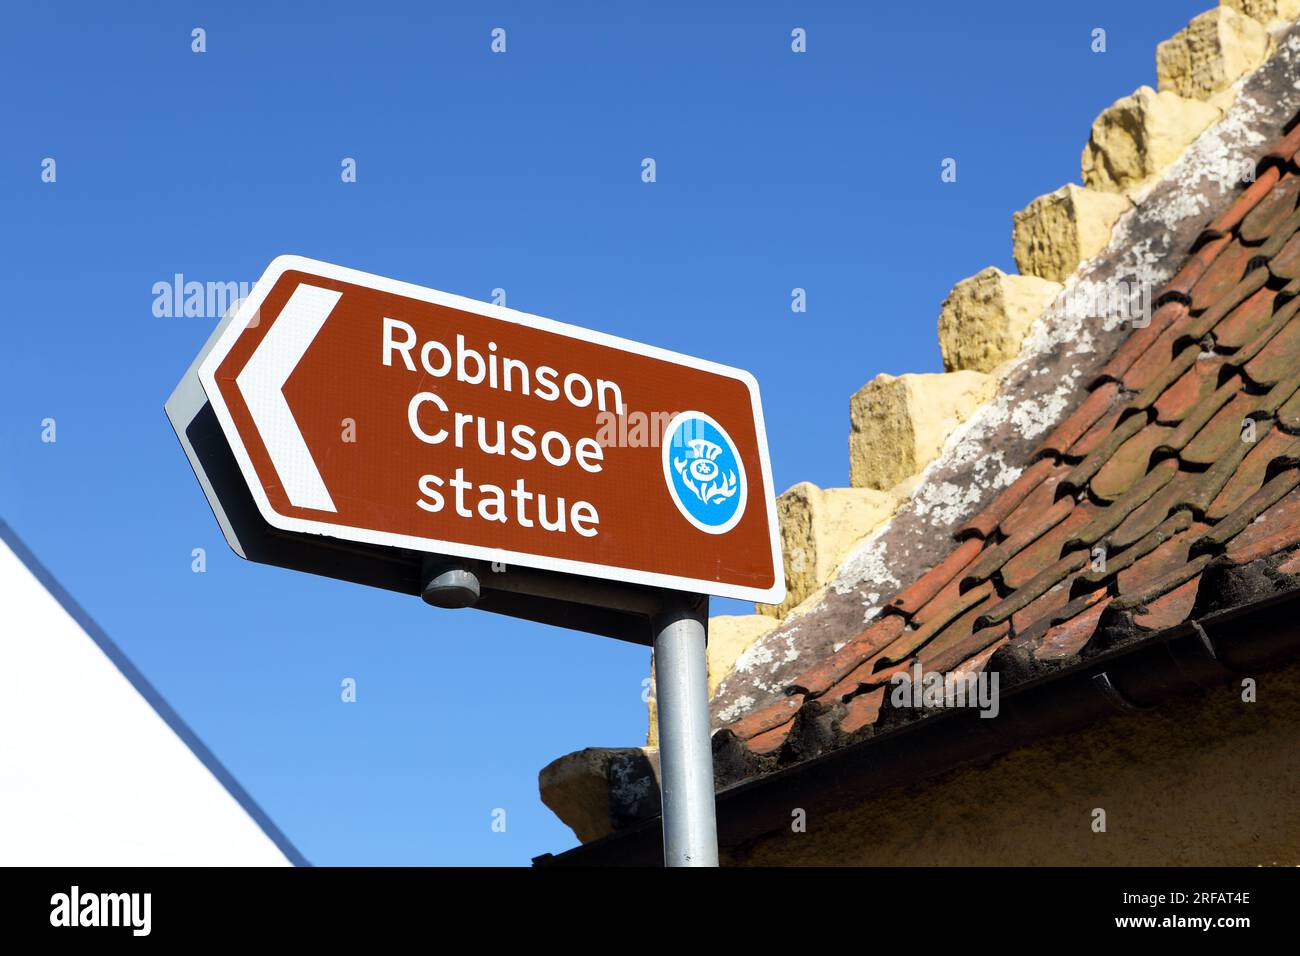 Sign showing the direction to the Robinson Crusoe statue in Scotland, in the Fife town of Lower Largo. Stock Photo